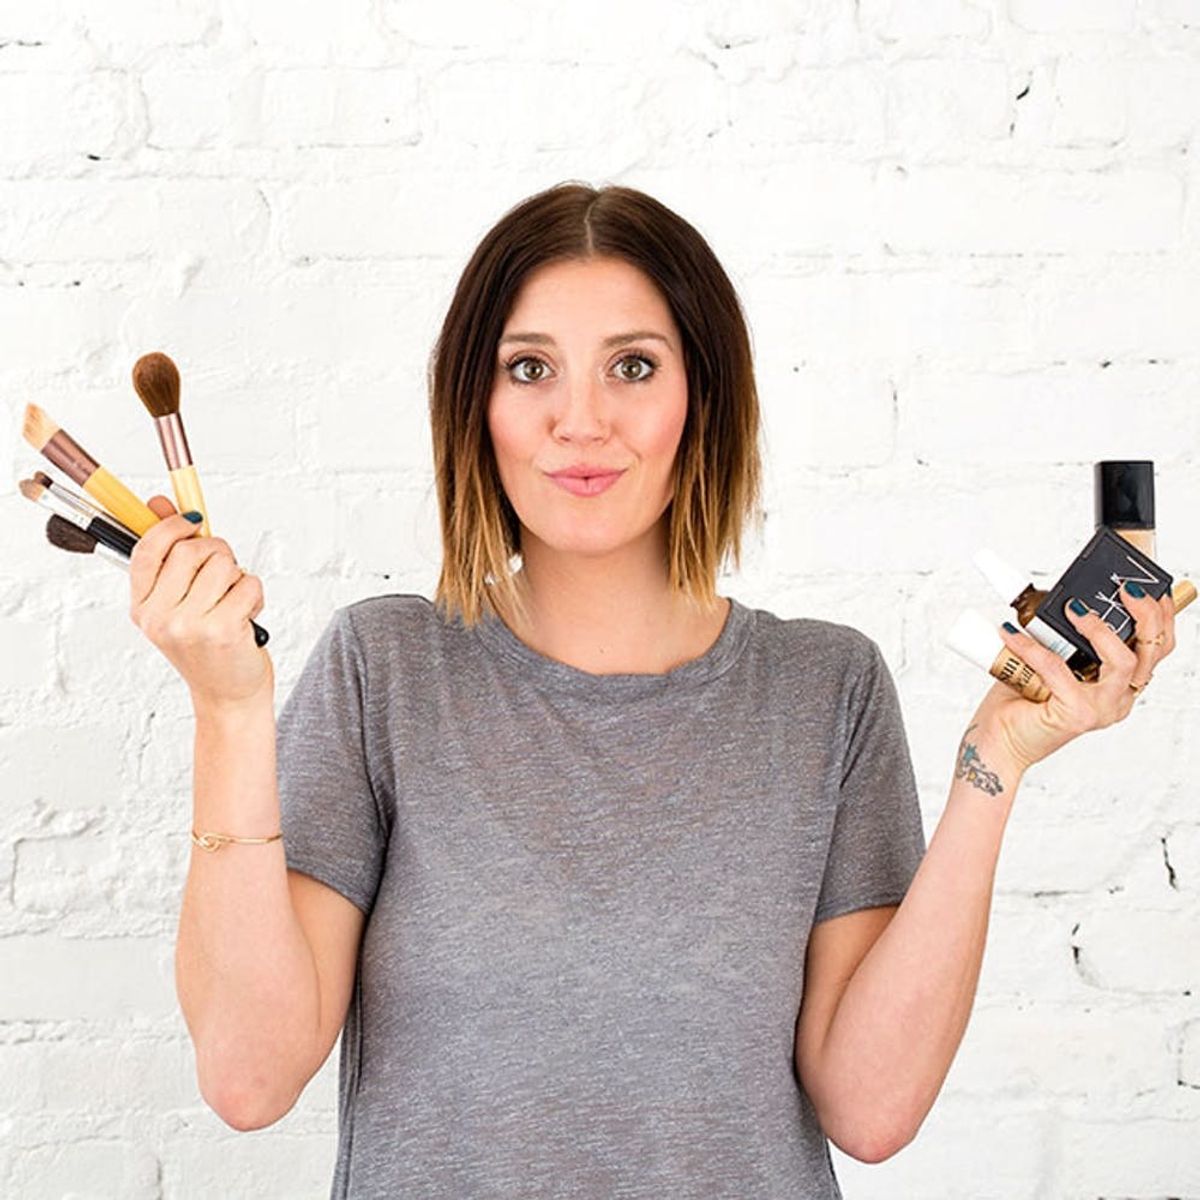 The Average Woman Owns *This* Much Makeup